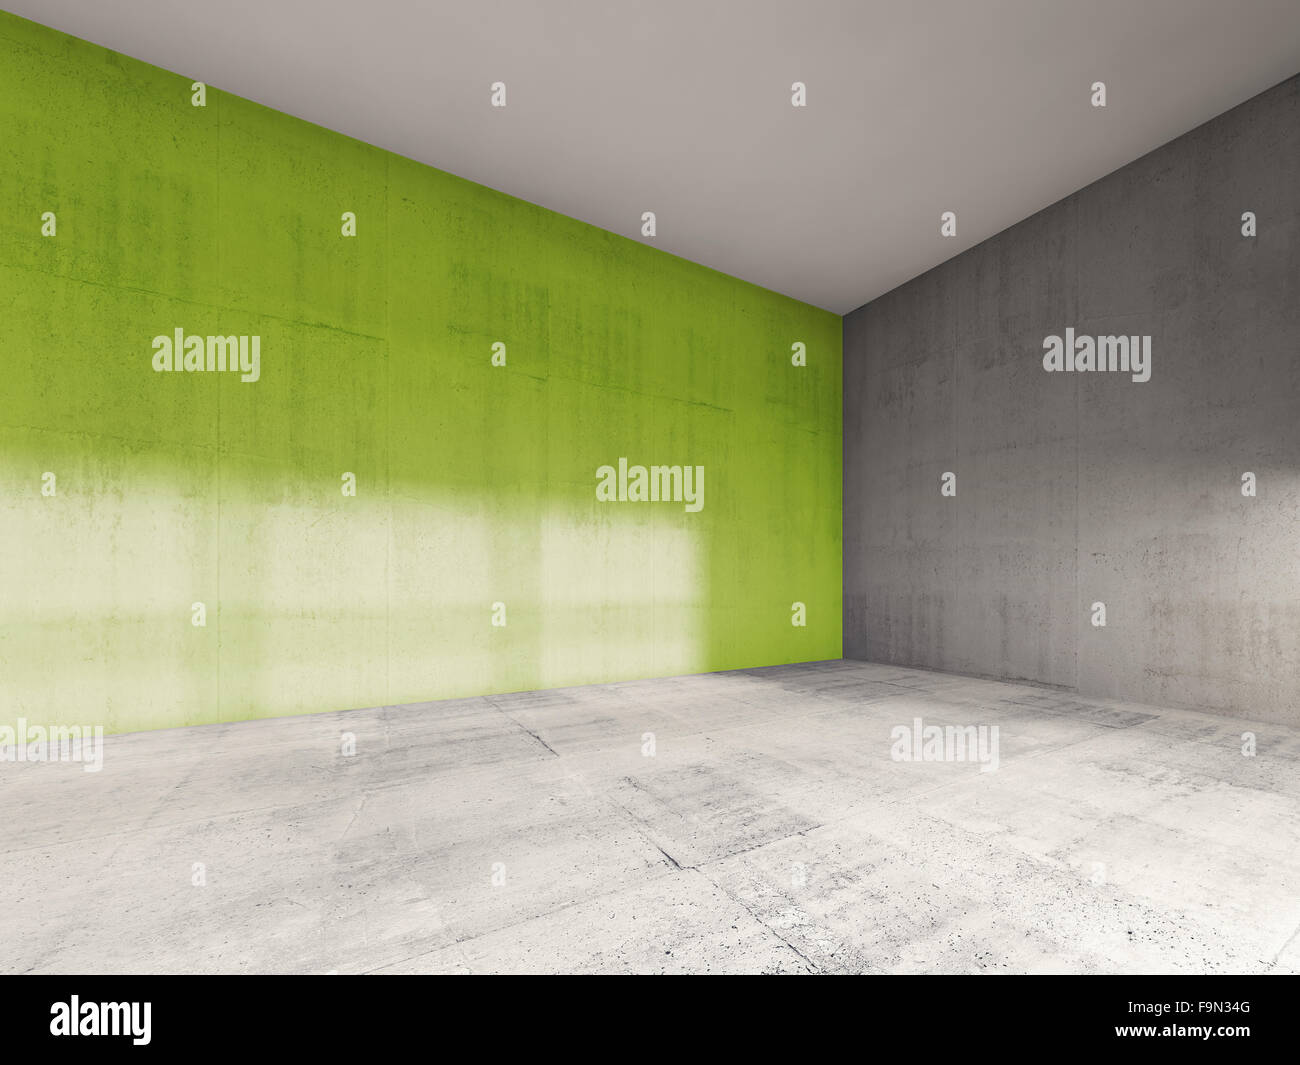 Abstract modern interior, empty room with green concrete wall. 3d render illustration Stock Photo